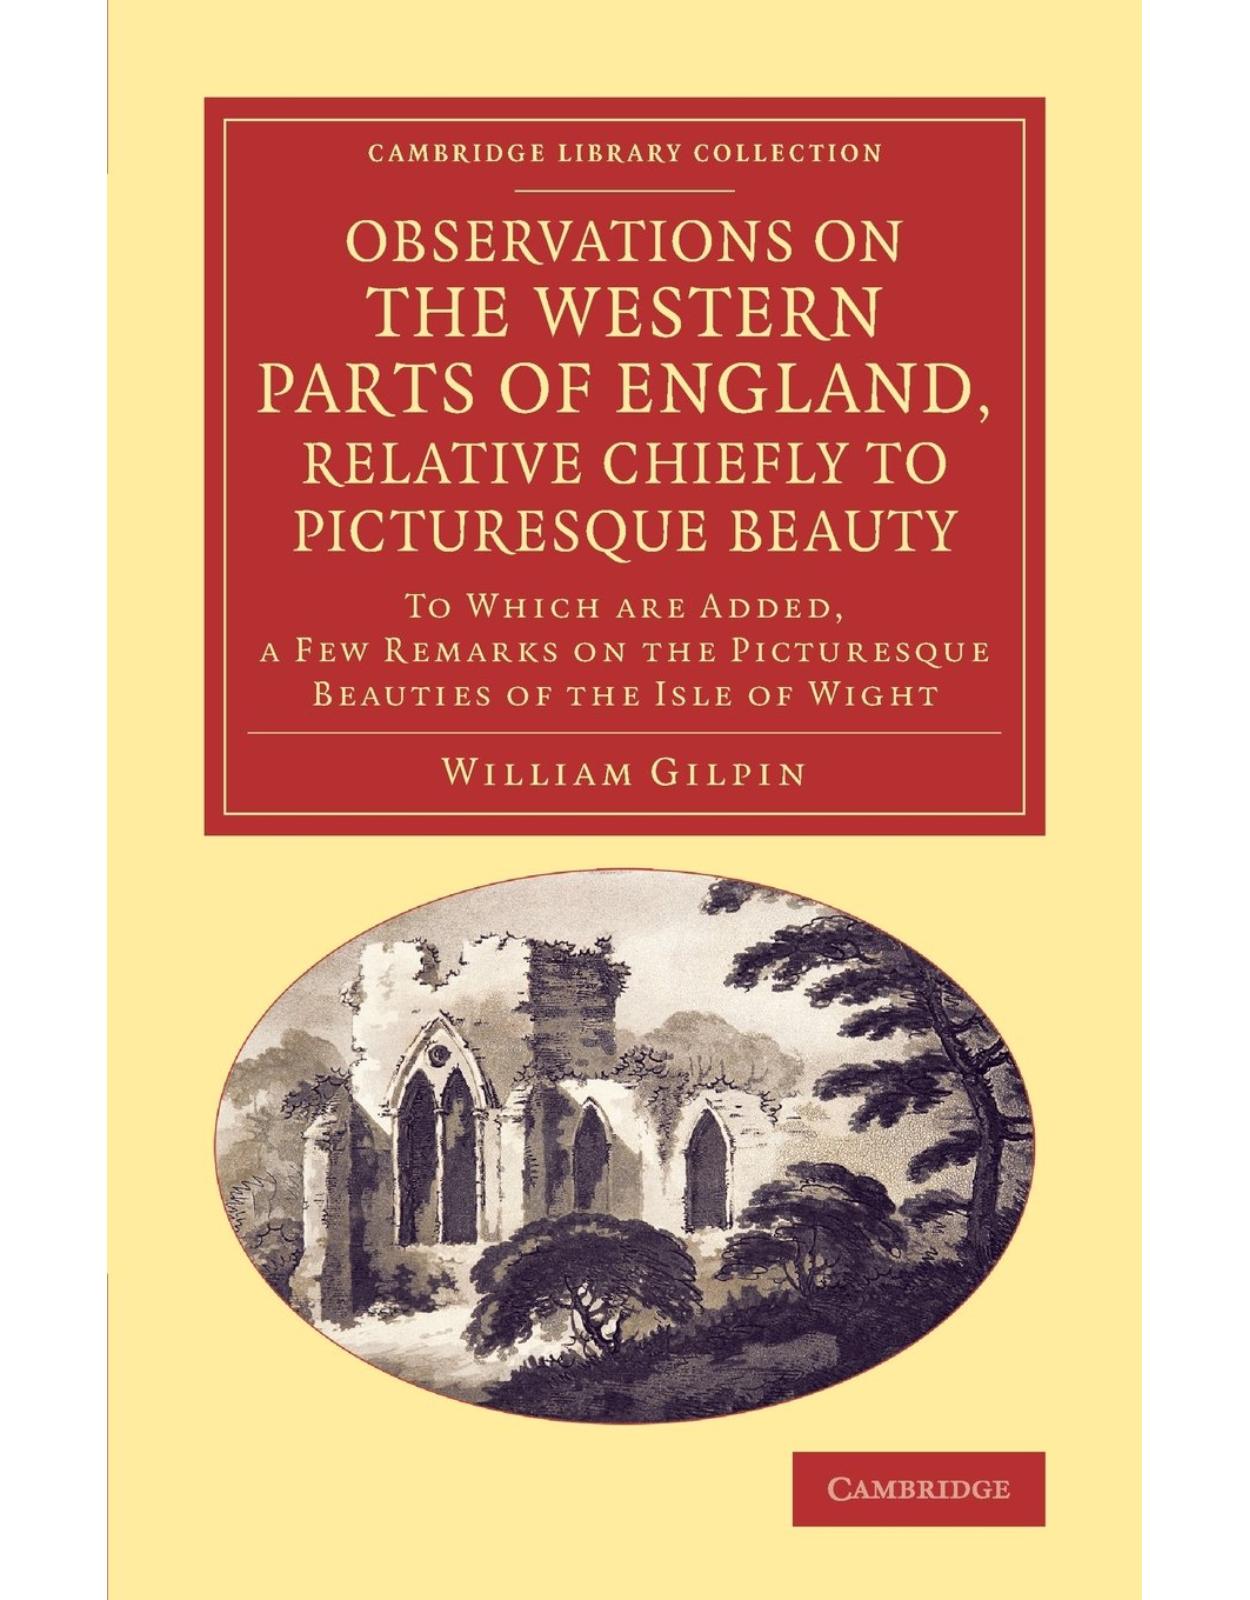 Observations on the Western Parts of England, Relative Chiefly to Picturesque Beauty: To Which Are Added, a Few Remarks on the Picturesque Beauties of ... Library Collection - Art and Architecture)